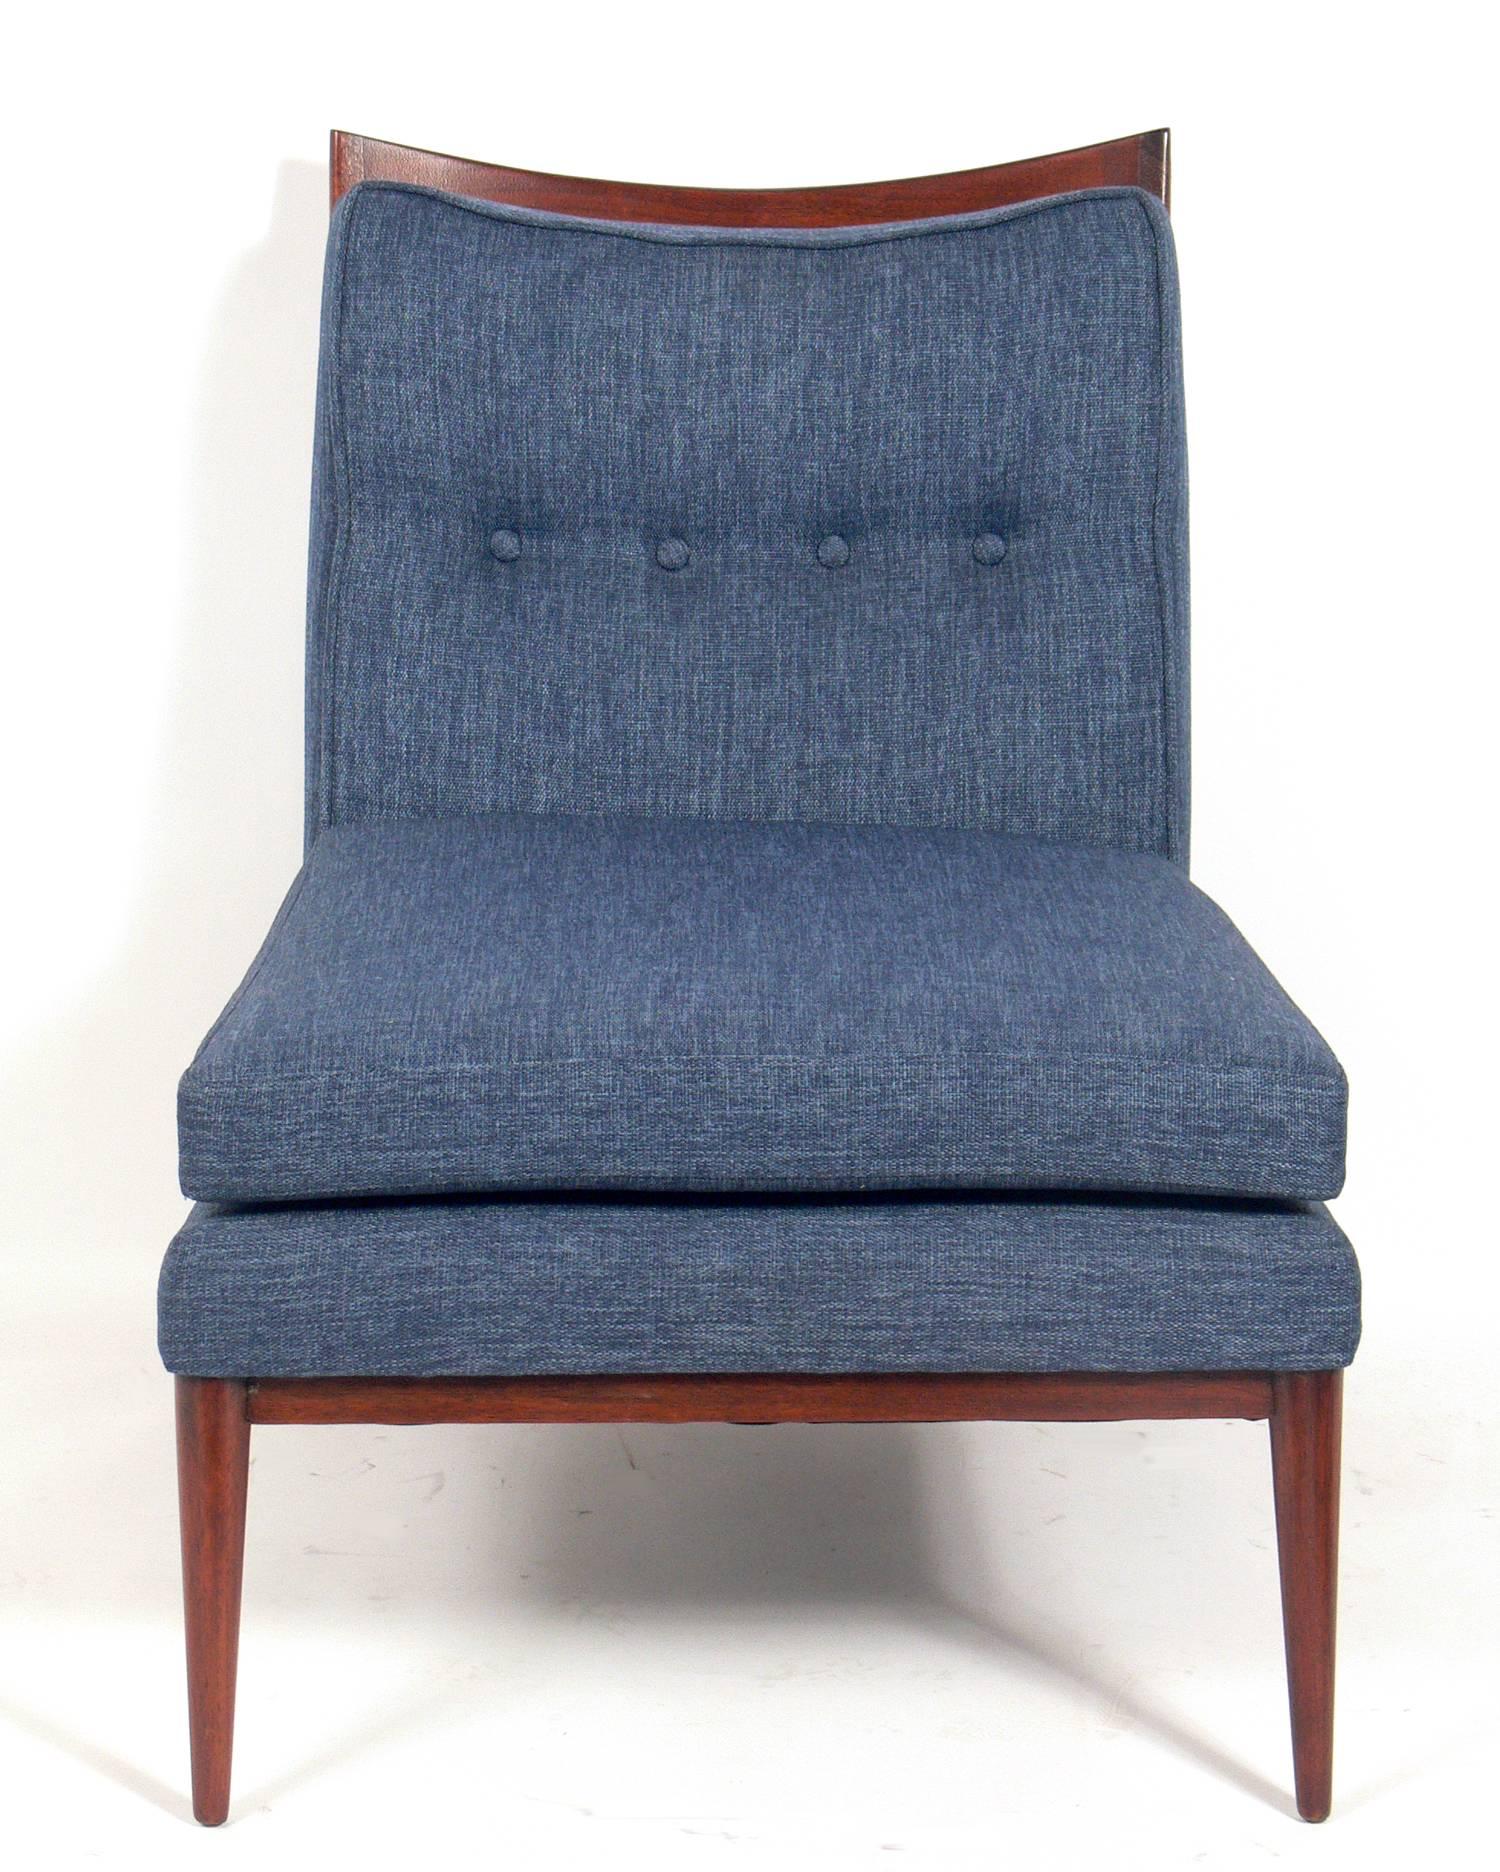 Modernist lounge chair, designed by Paul McCobb, circa 1950s. It has been reupholstered in a ocean blue color linen style fabric.